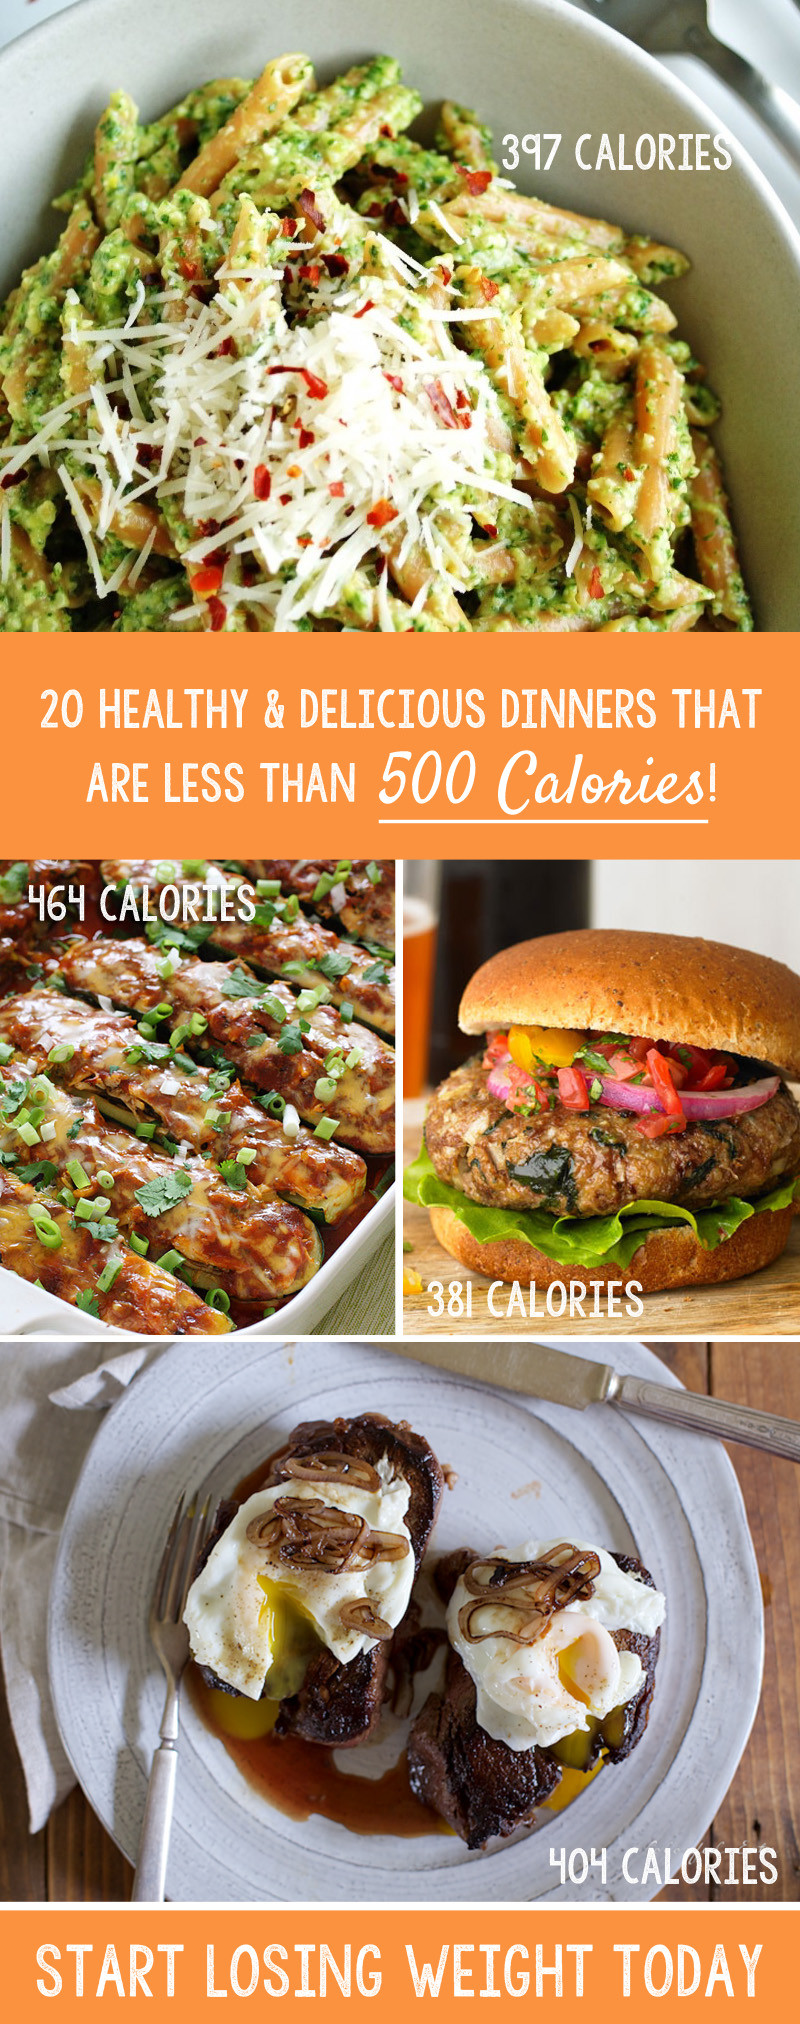 Healthy Low Calorie Dinners
 Low Calorie Specials 20 Healthy & Delicious Dinners Less